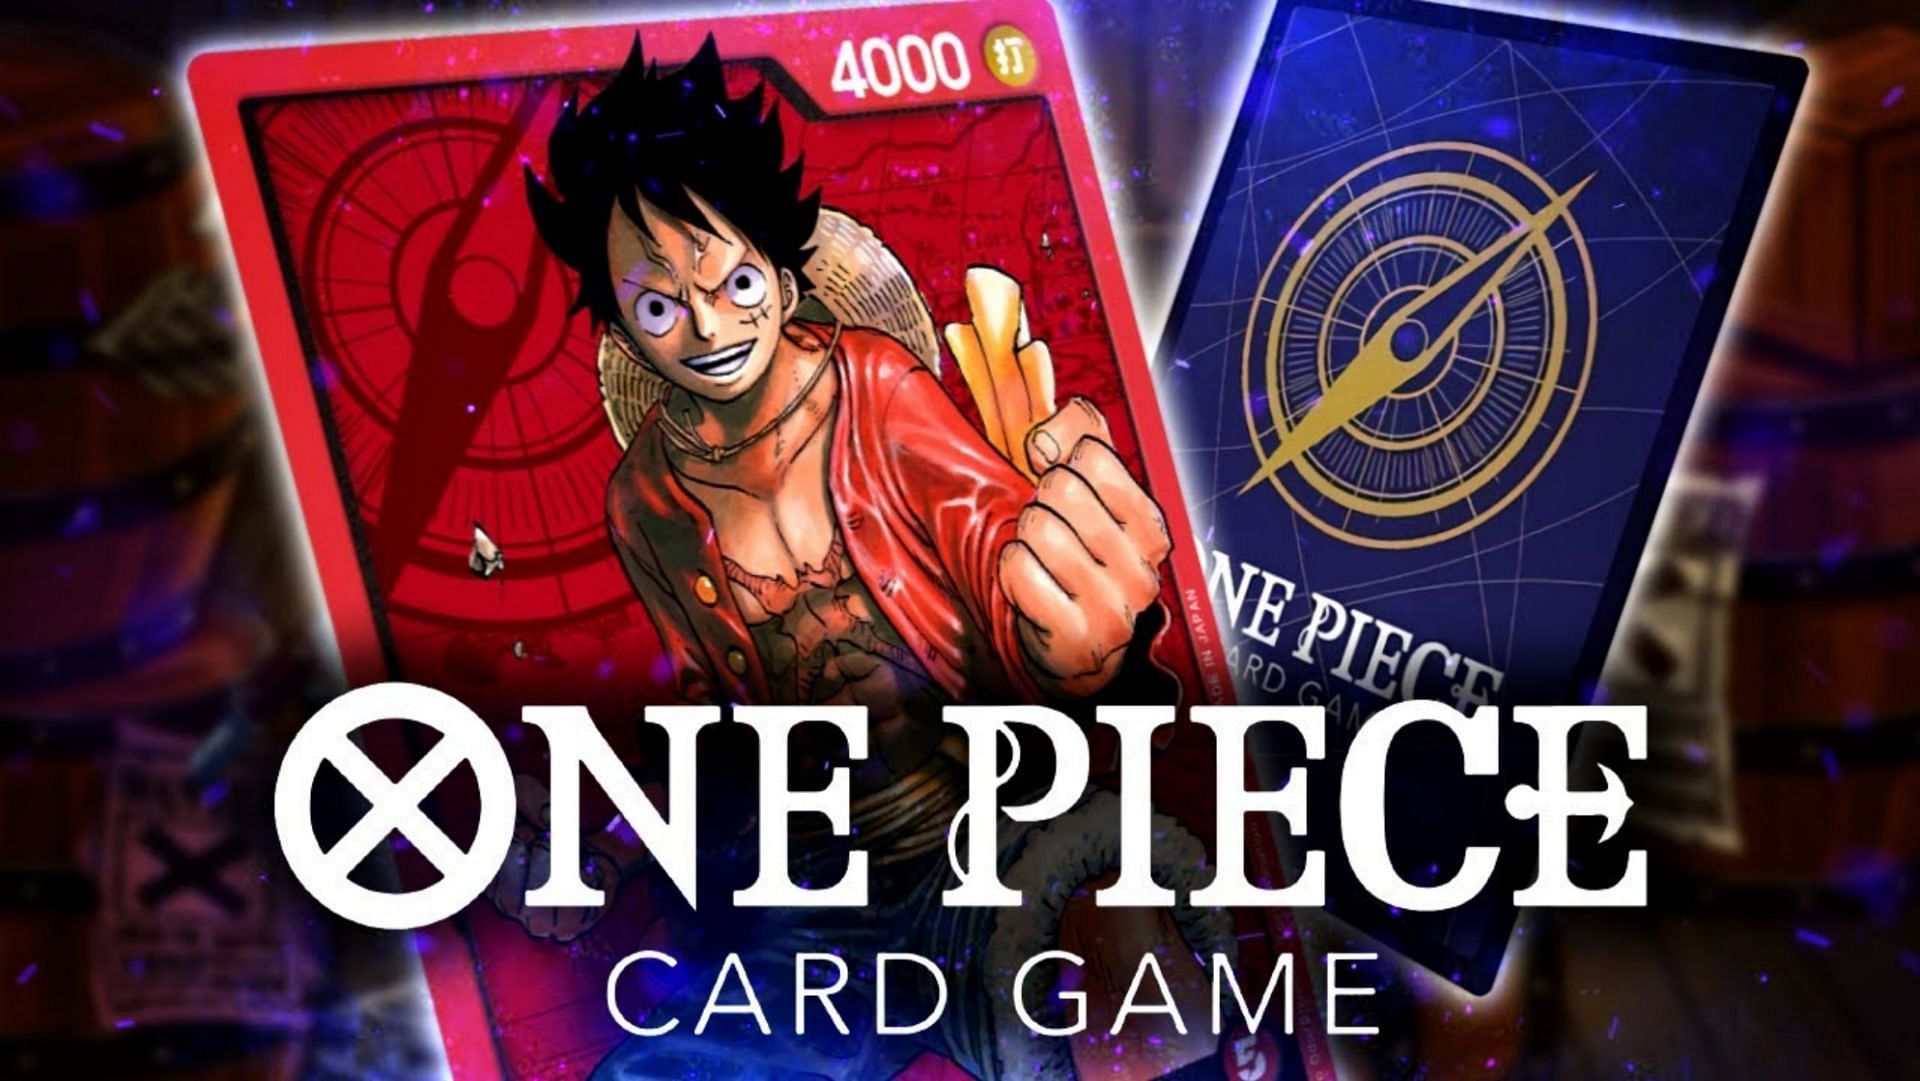 how to get 5000 stats in total a one piece game fast｜TikTok Search